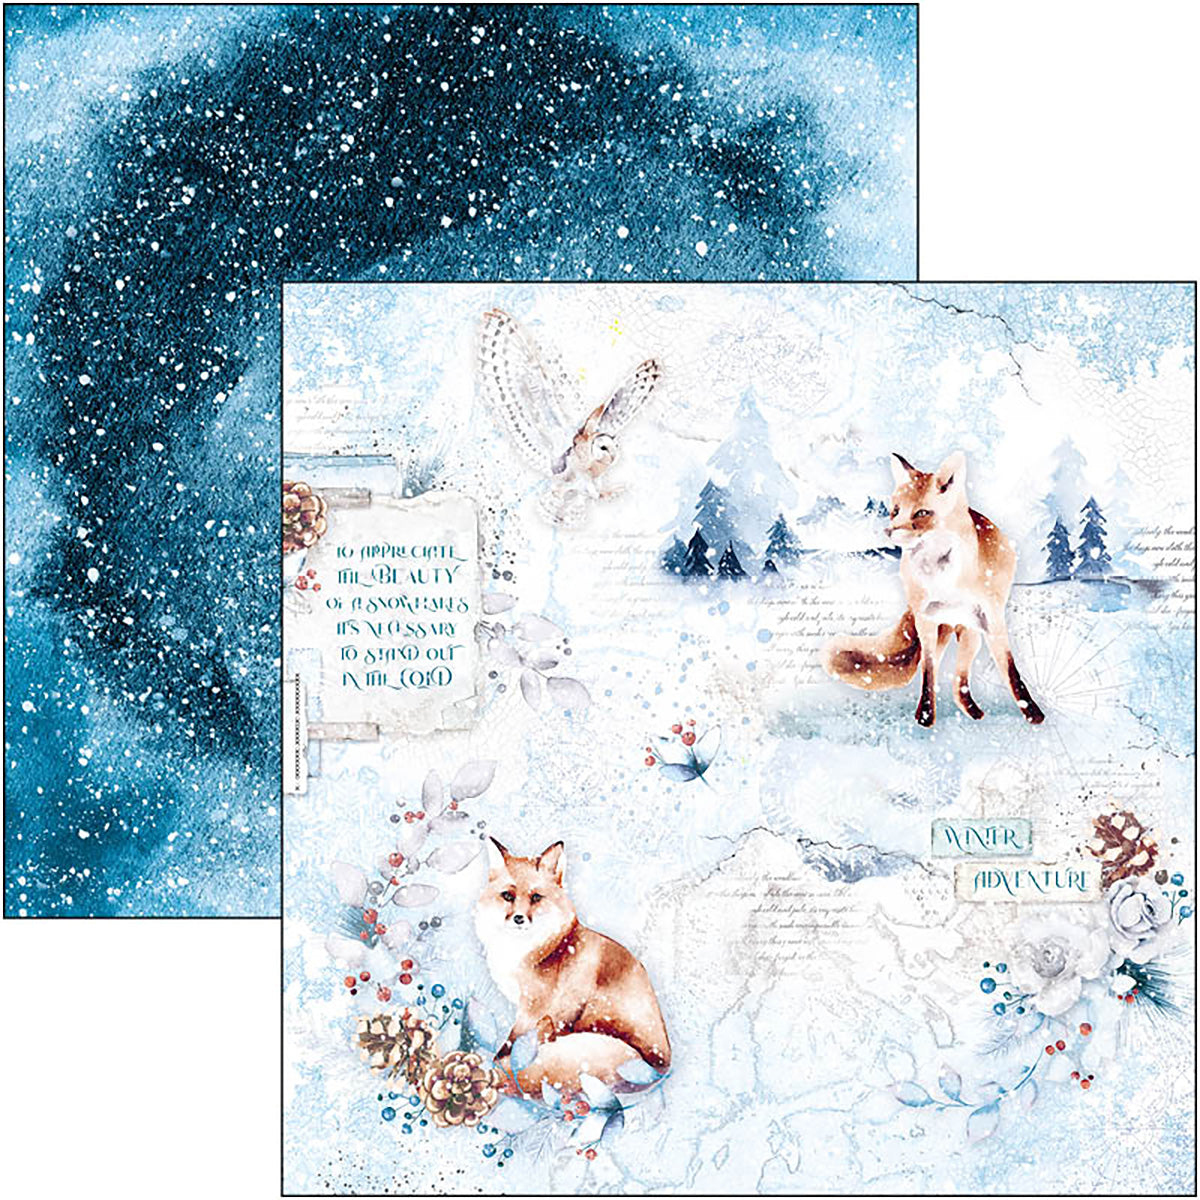 Ciao Bella 1 Piece WINTER GREETINGS Scrapbook Paper Scrapbooking Paper 12 X  12 Inches Mixed Media Made in Italy CBSS162 